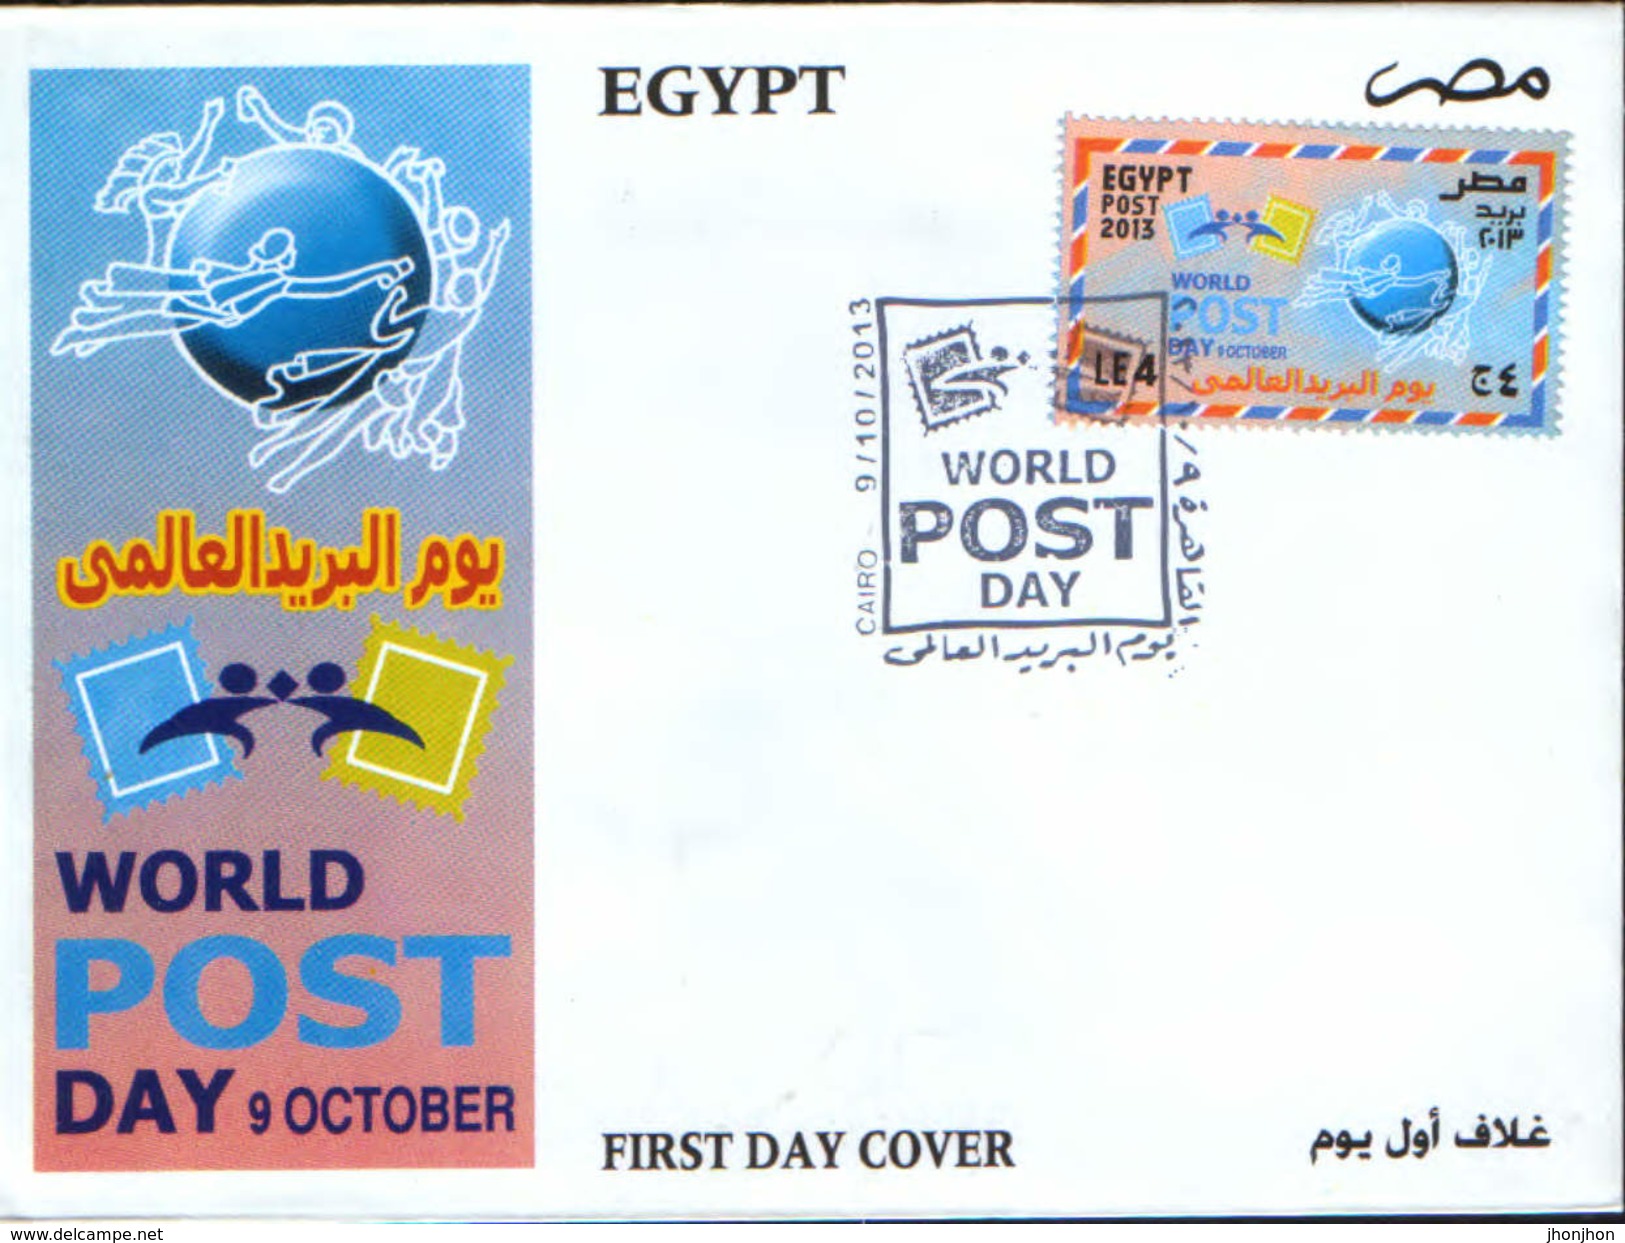 Egypt - 2013 - World Post Day 9 October ,fdc - UPU (Union Postale Universelle)